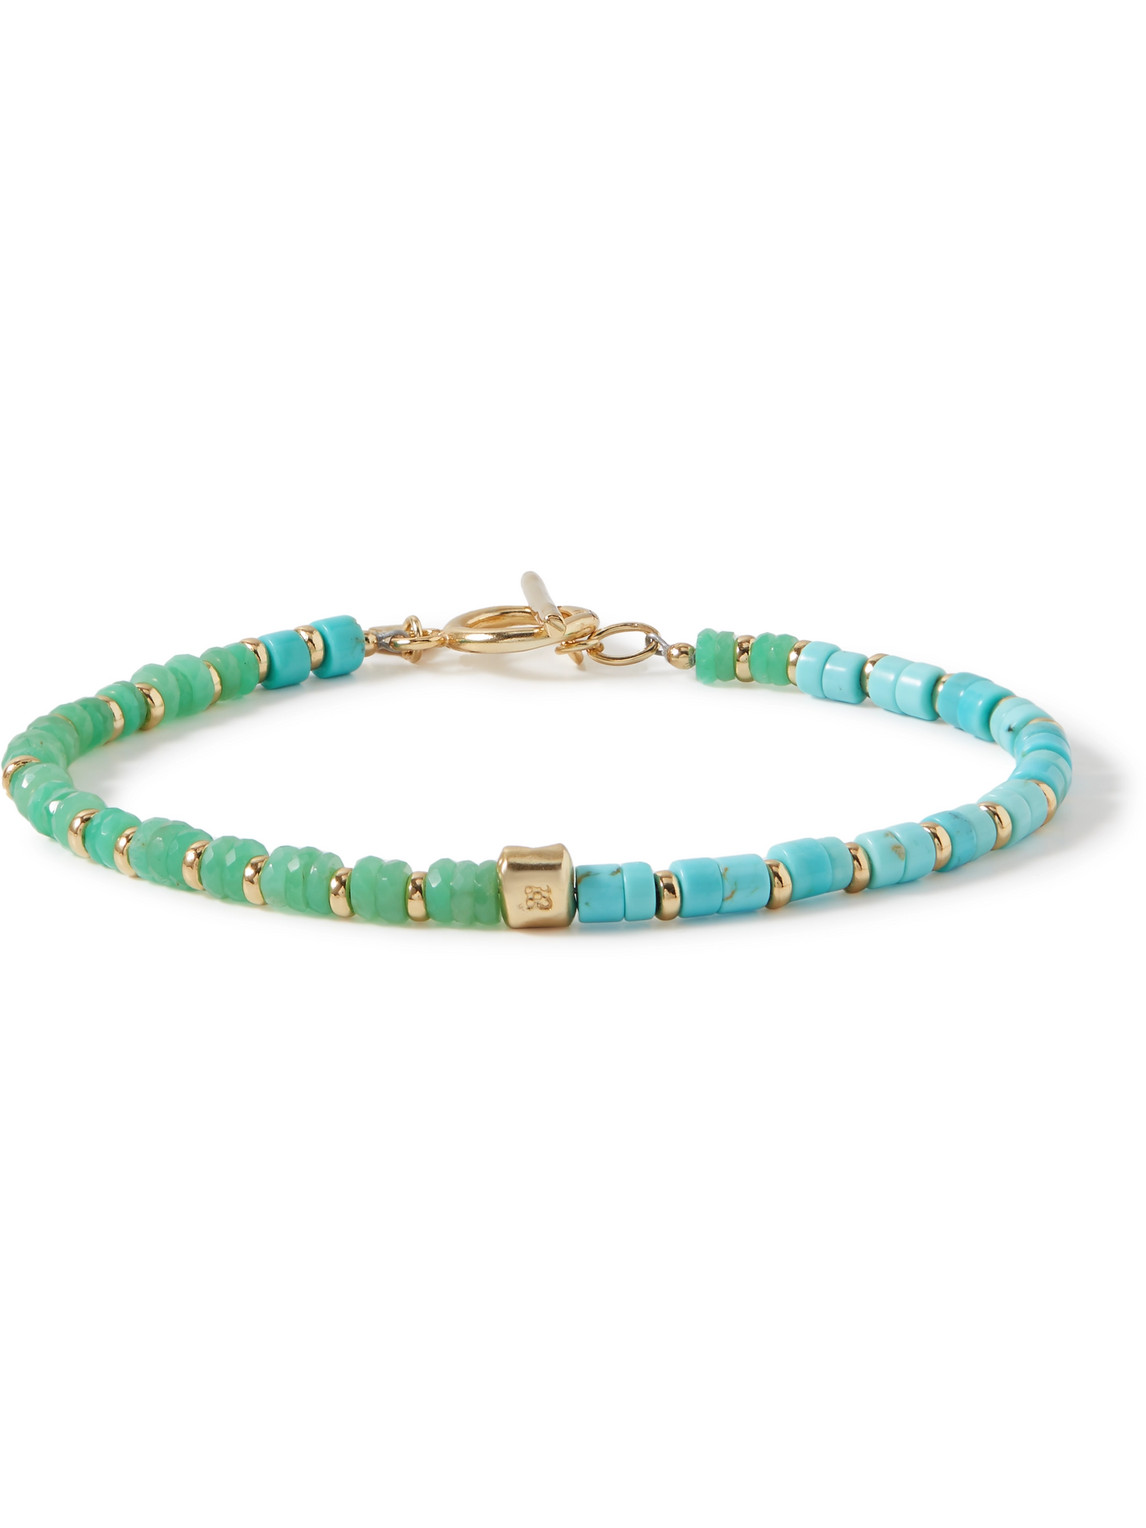 St. Tropez Gold-Plated Turquoise and Chyrsoprase Beaded Bracelet